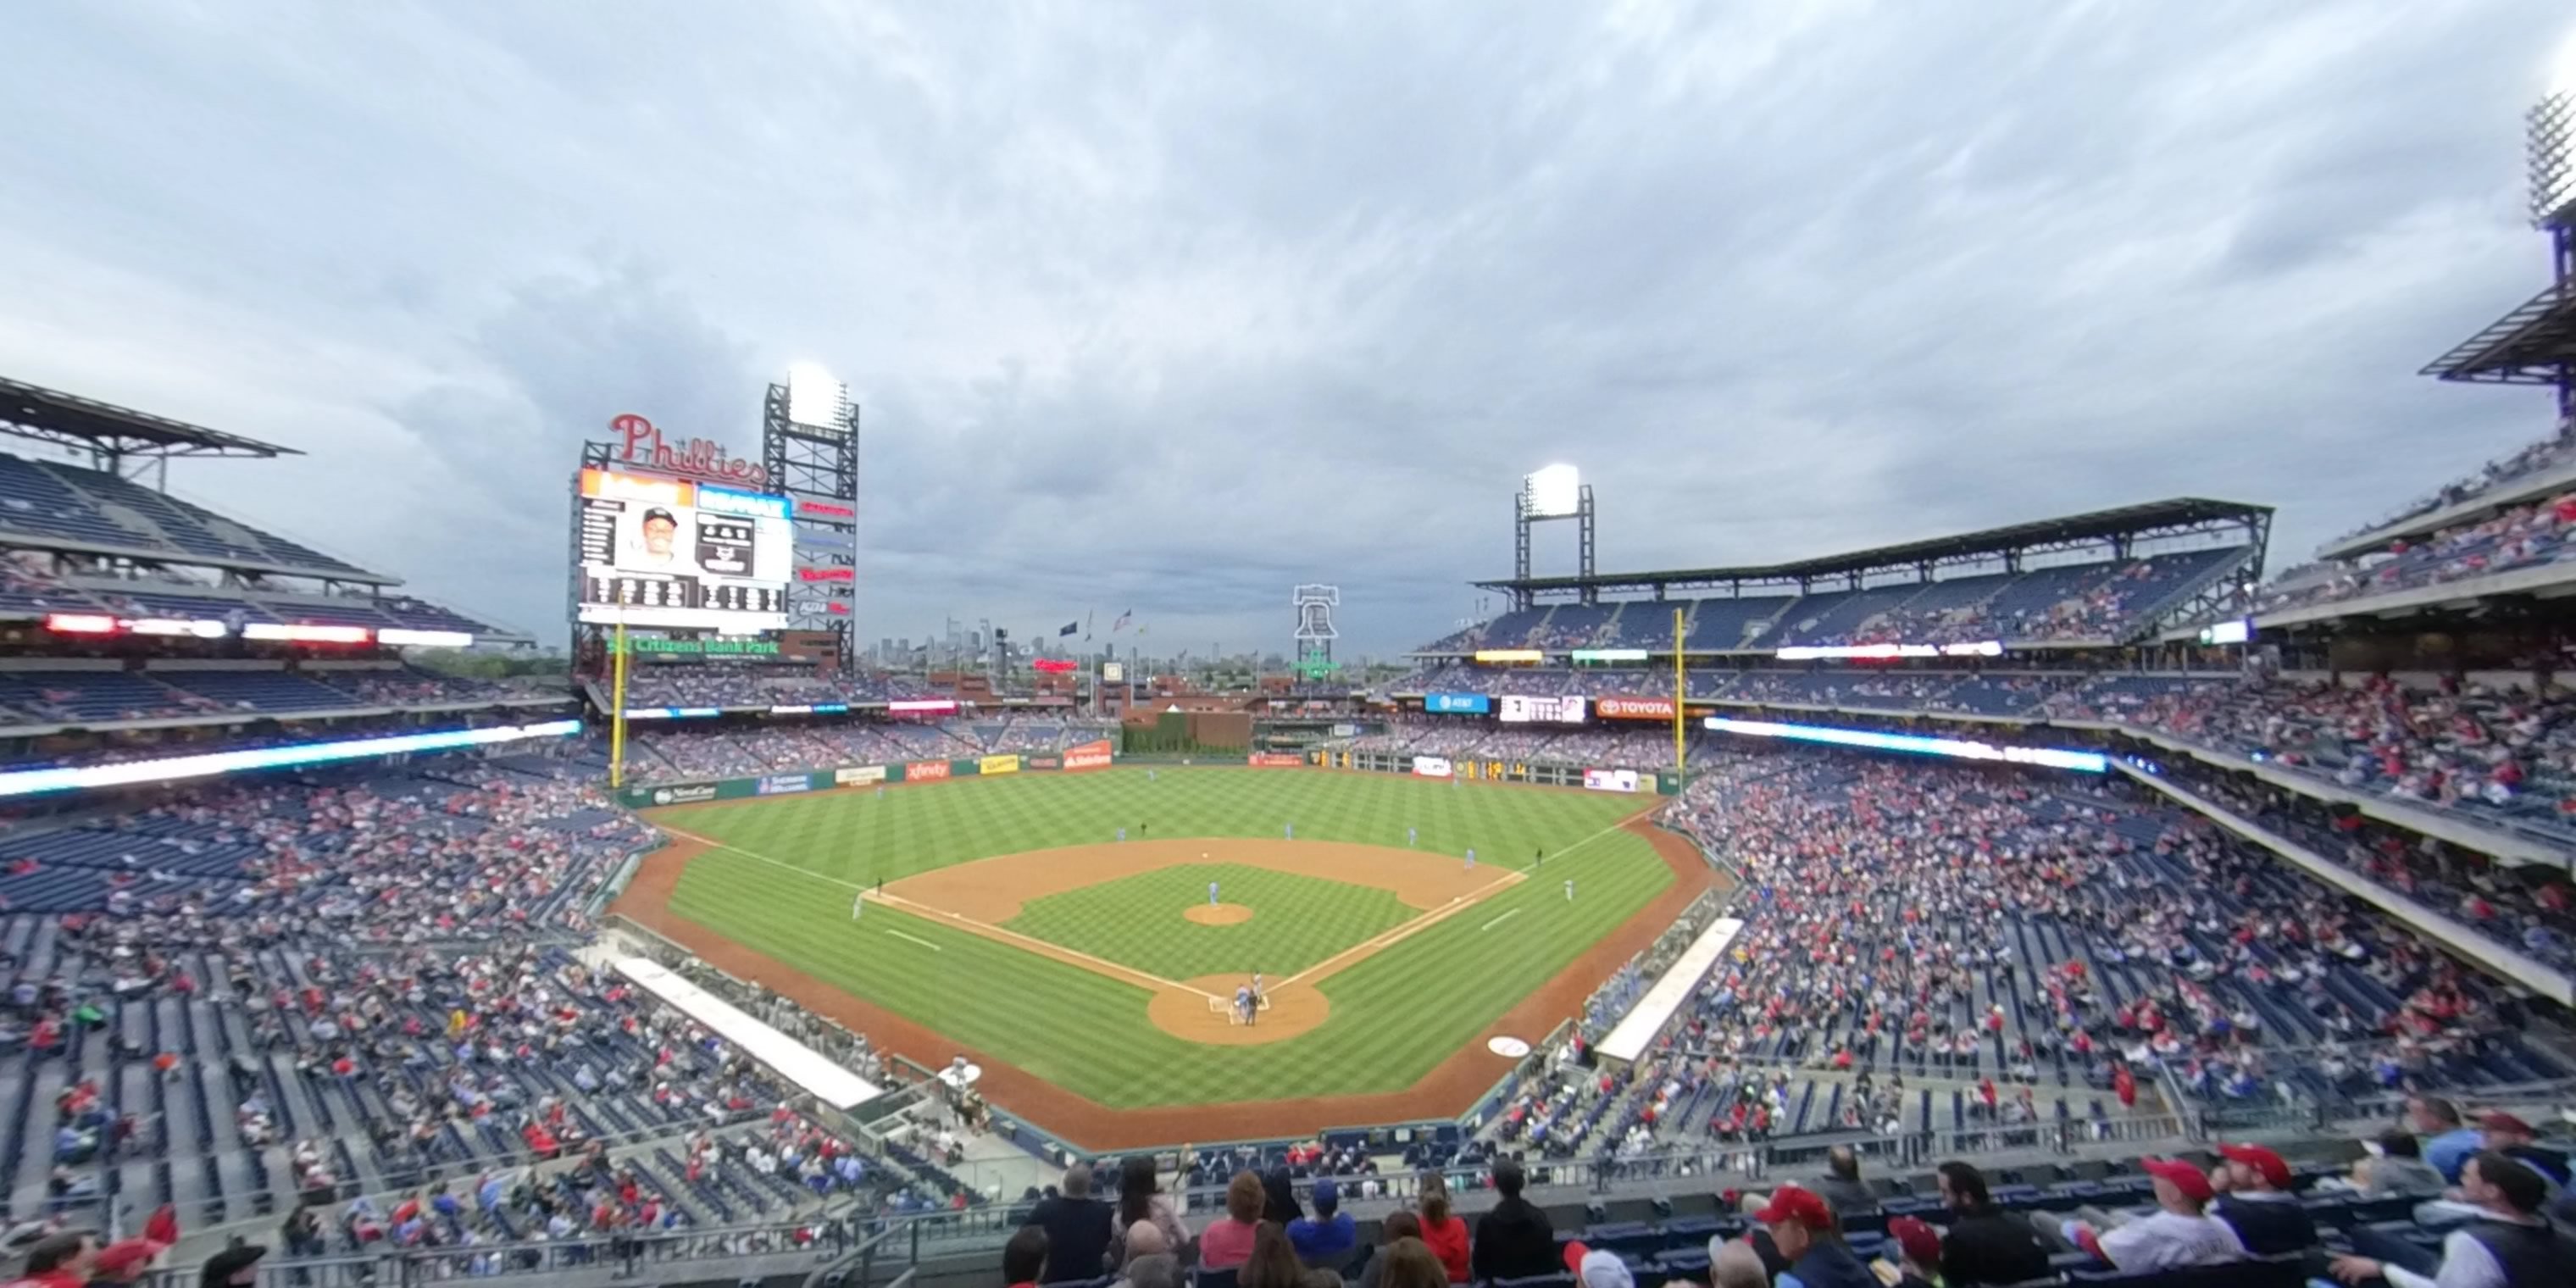 section 222 panoramic seat view  for baseball - citizens bank park